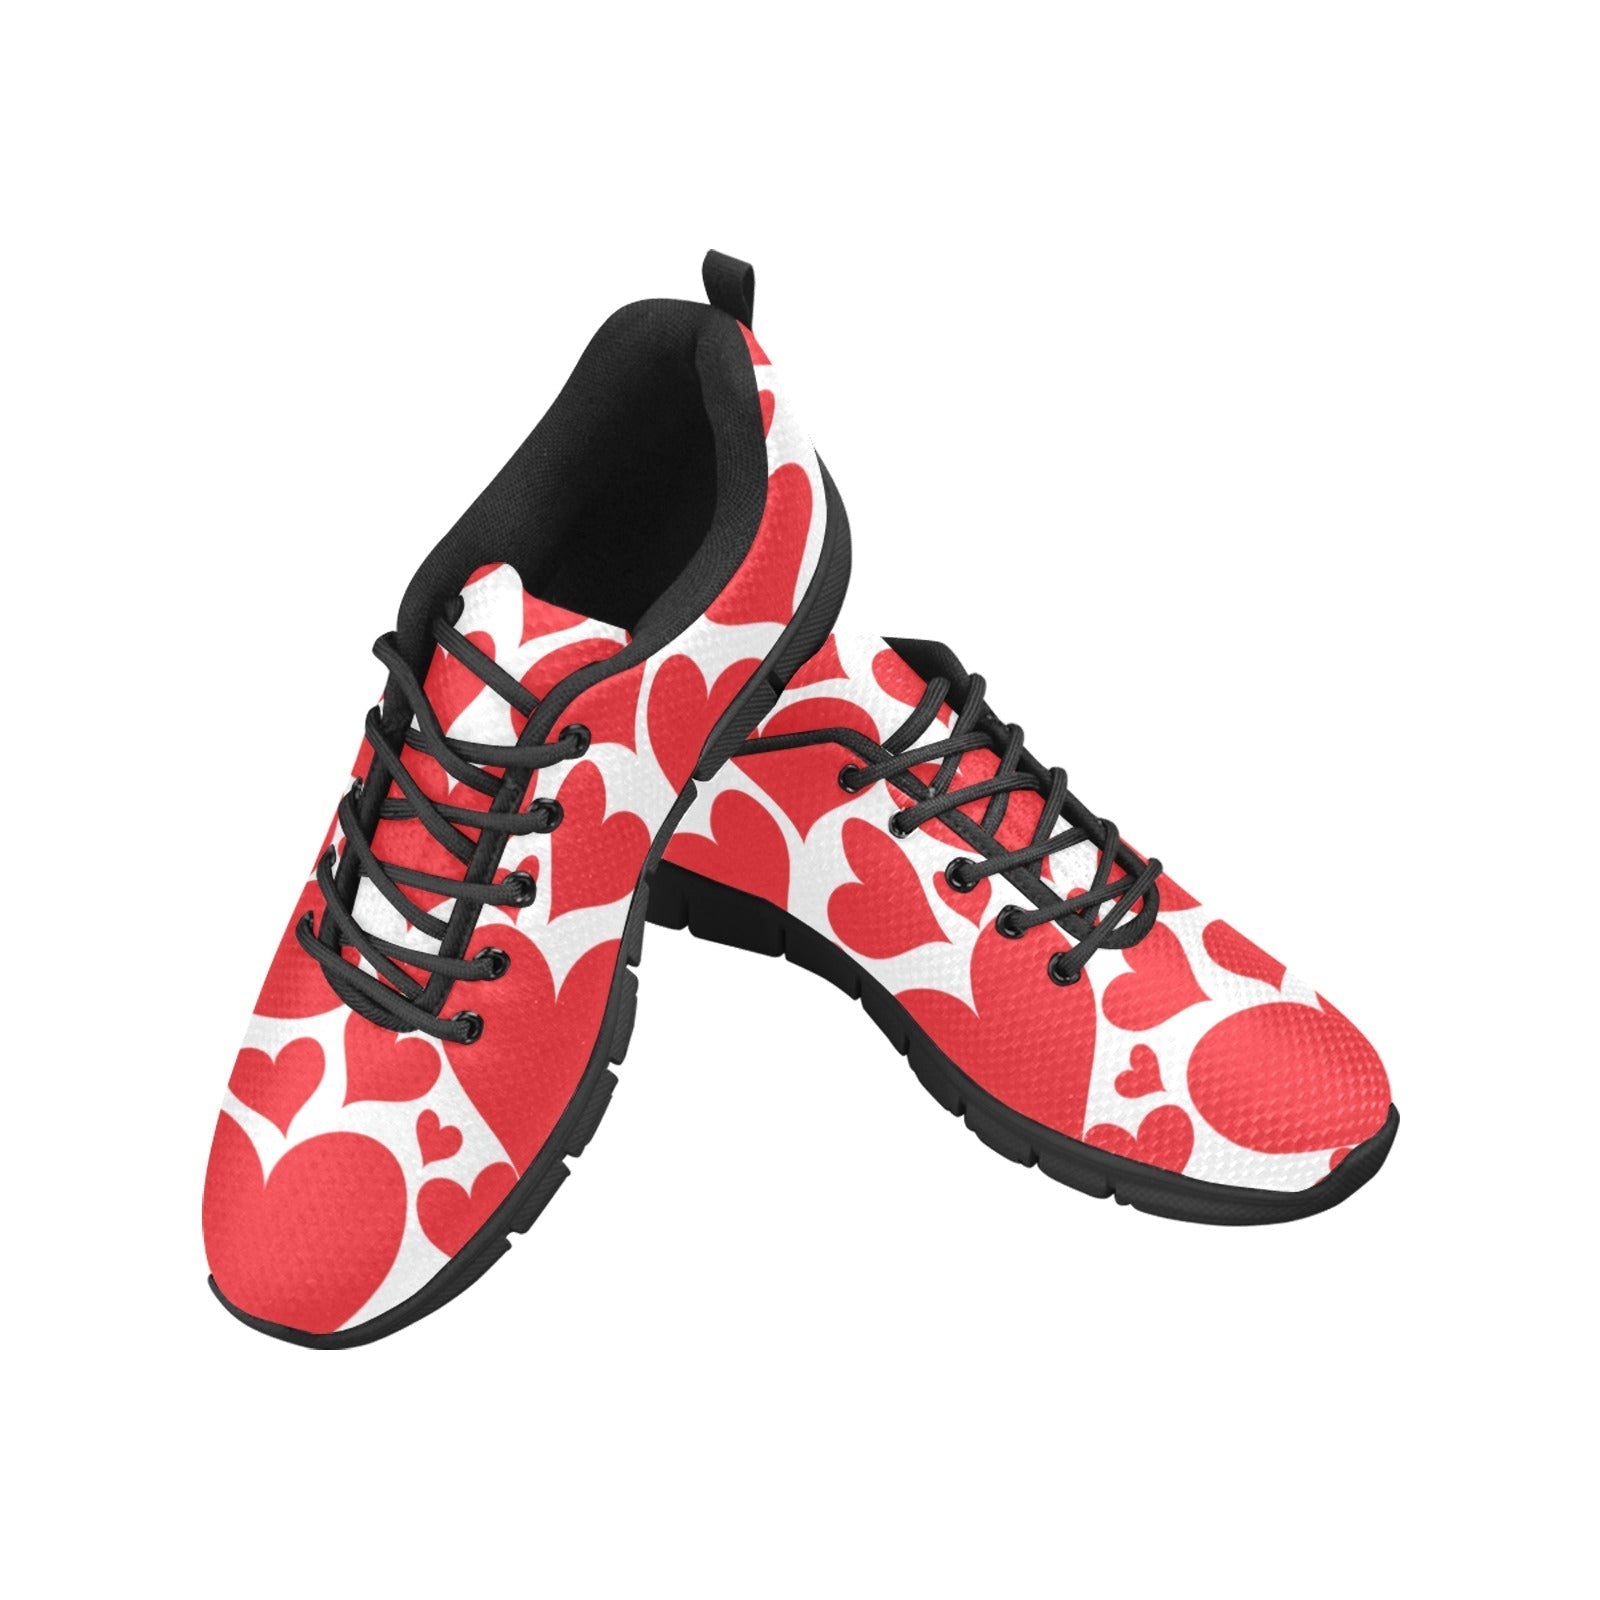 Uniquely You Sneakers for Men, Love Red Hearts Running Shoes - KRE Prime Deals